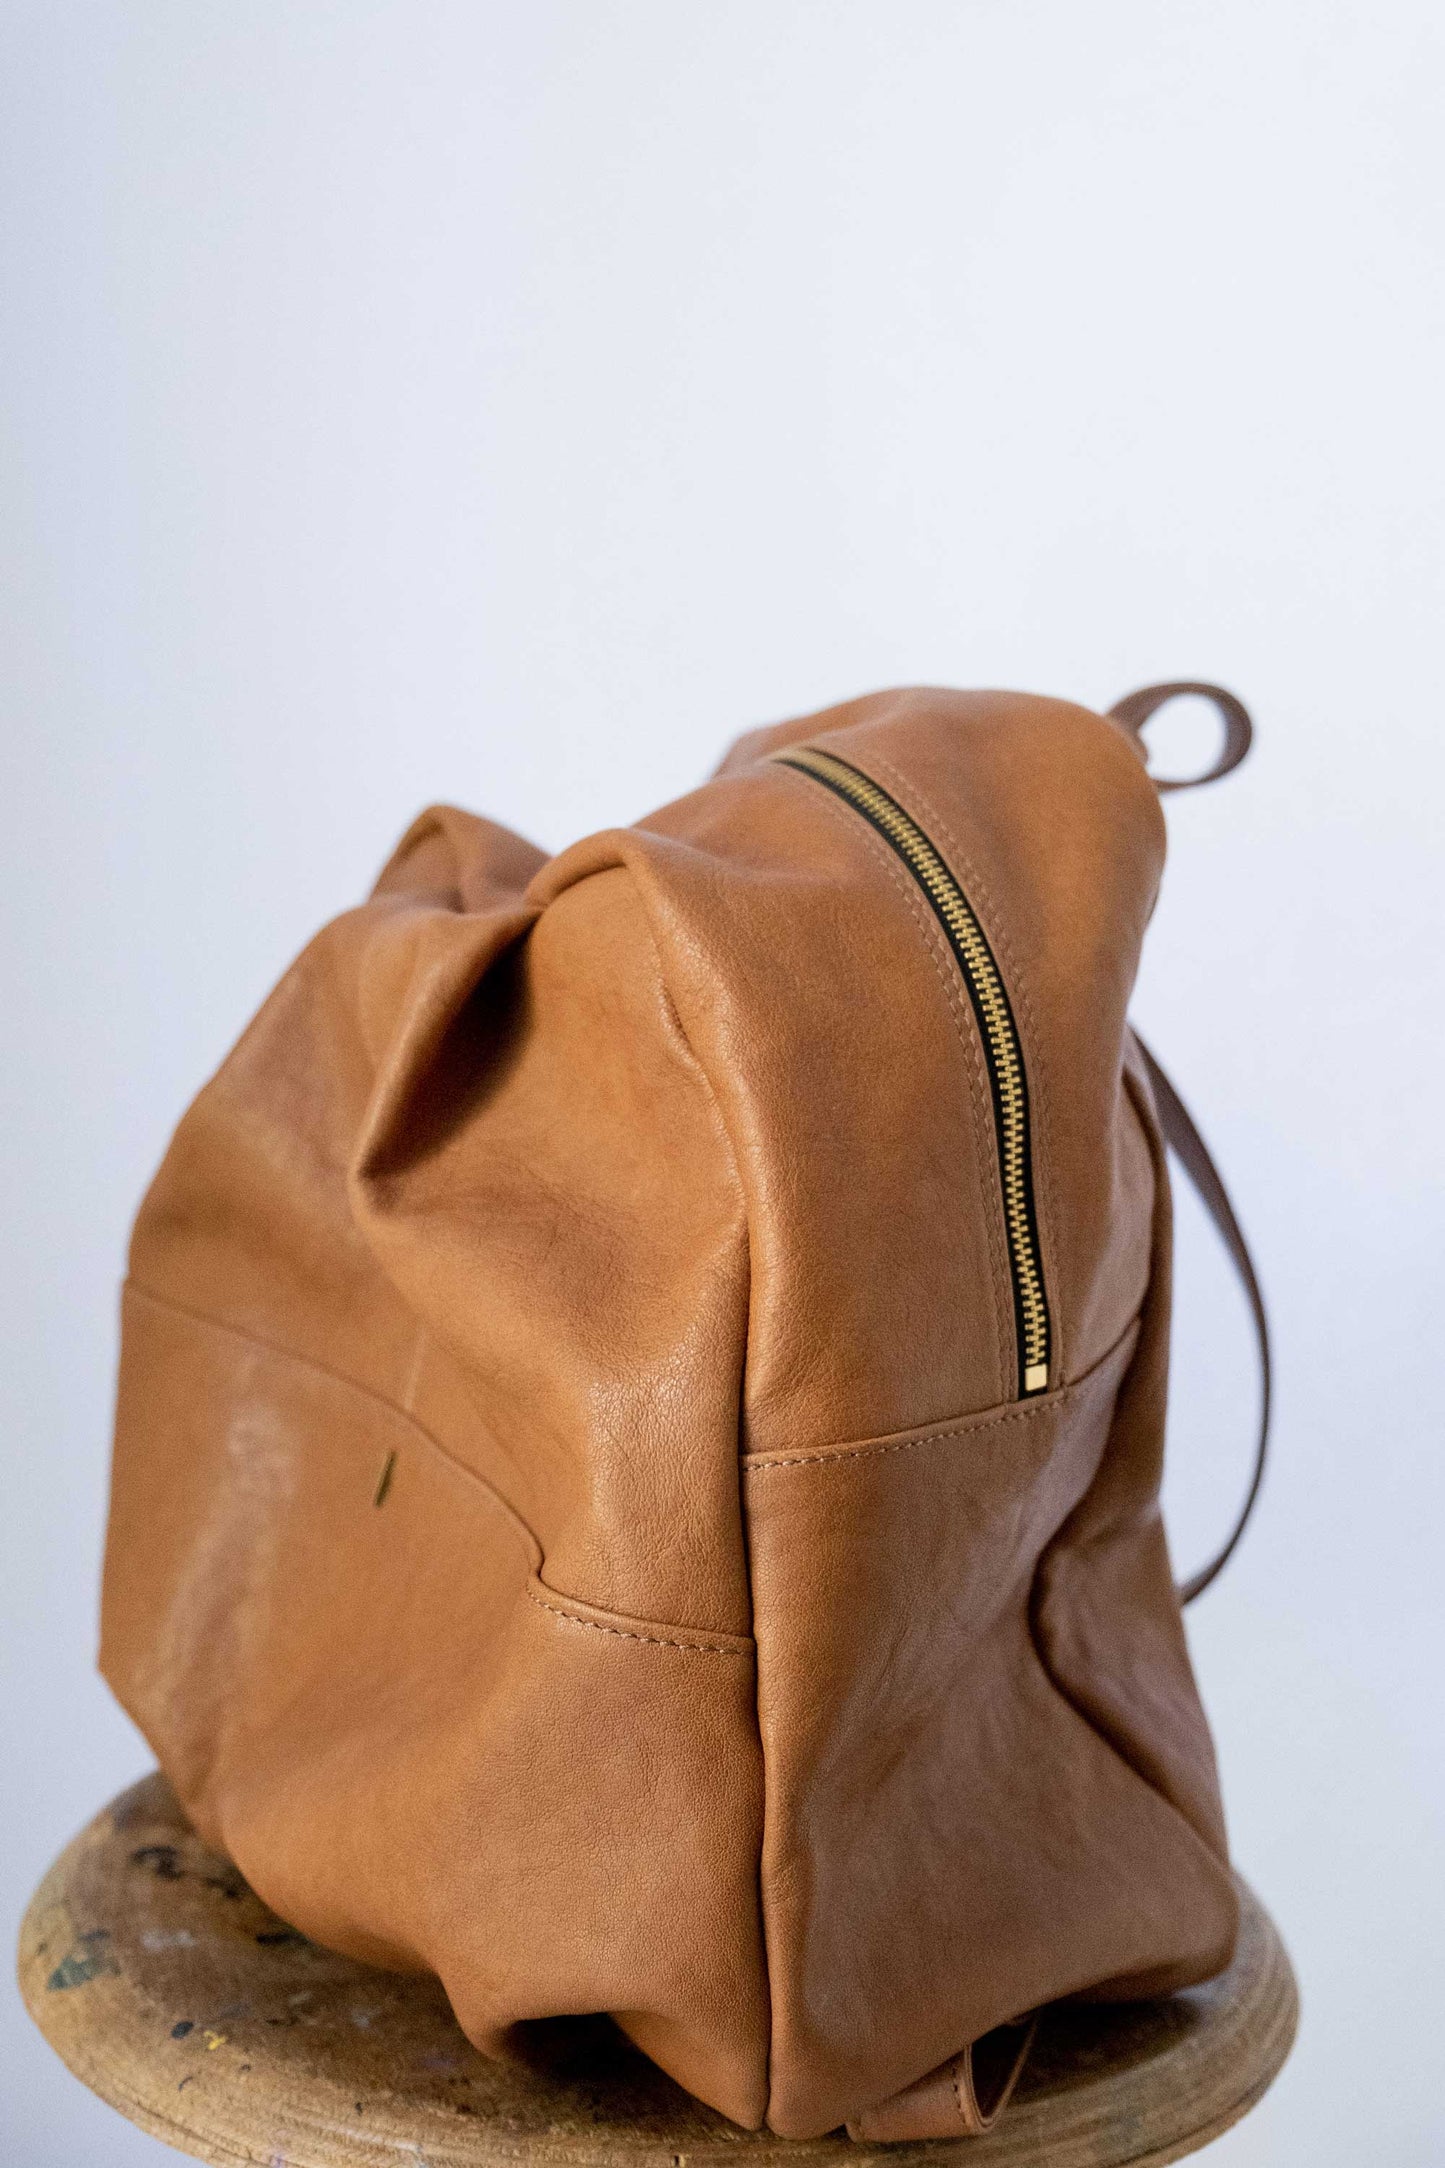 Nerina backpack in biscotto nappa leather